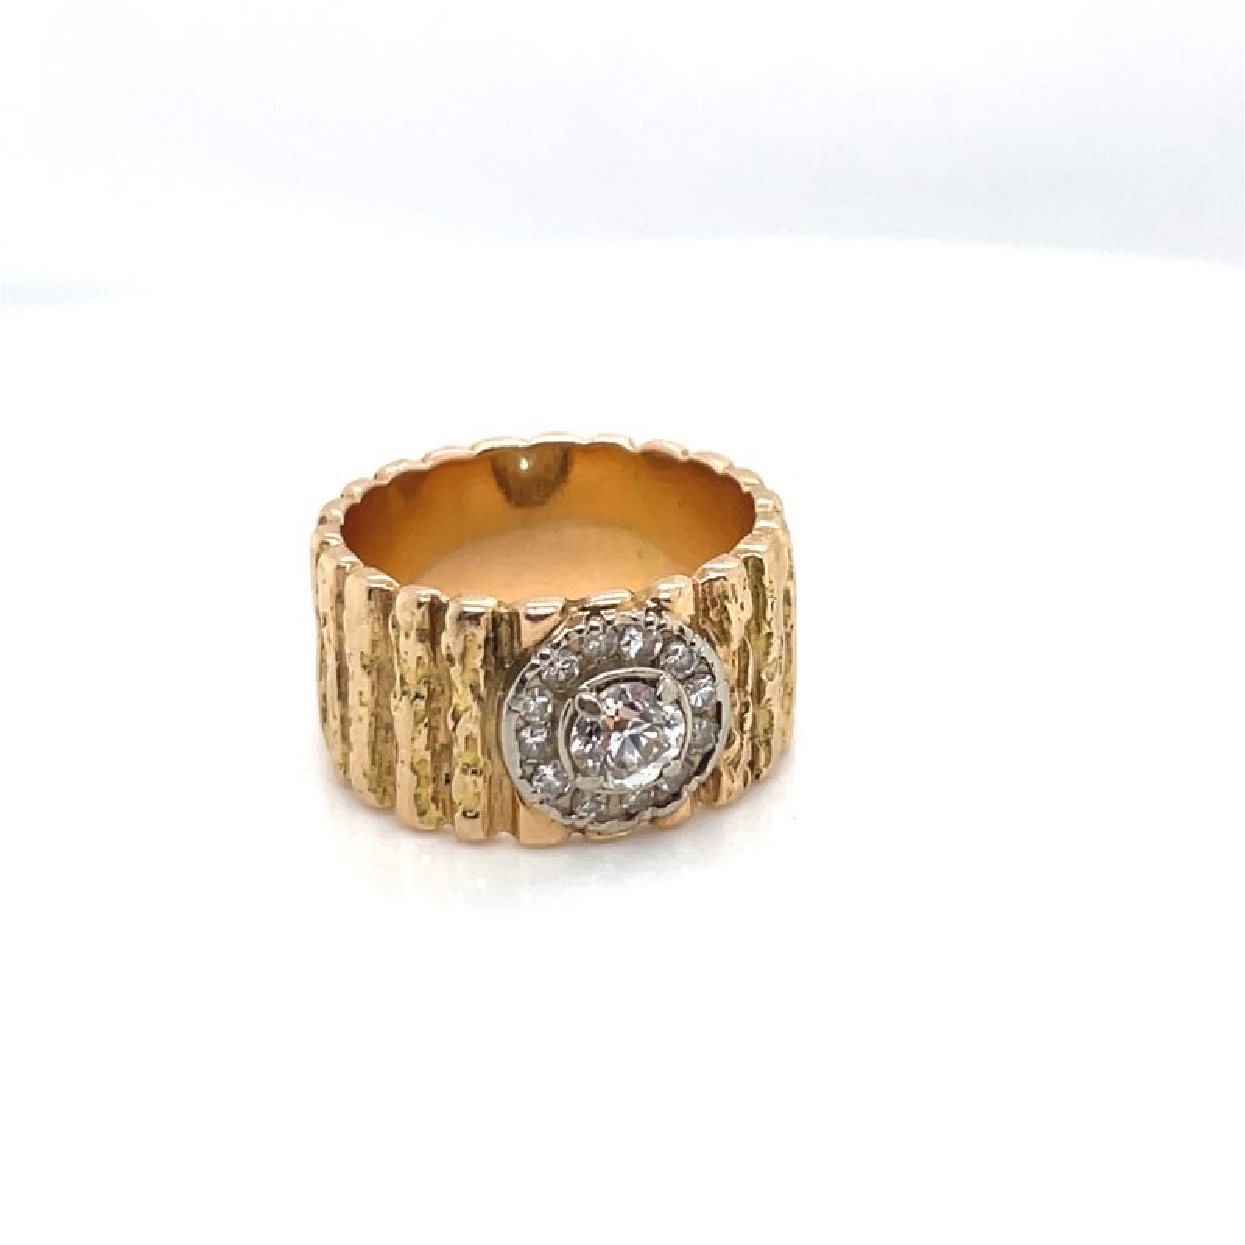 14K Yellow Gold Diamond Ring with Daimond Halo
Size: 6.5
.40ct Center Stone
.25ct Halo